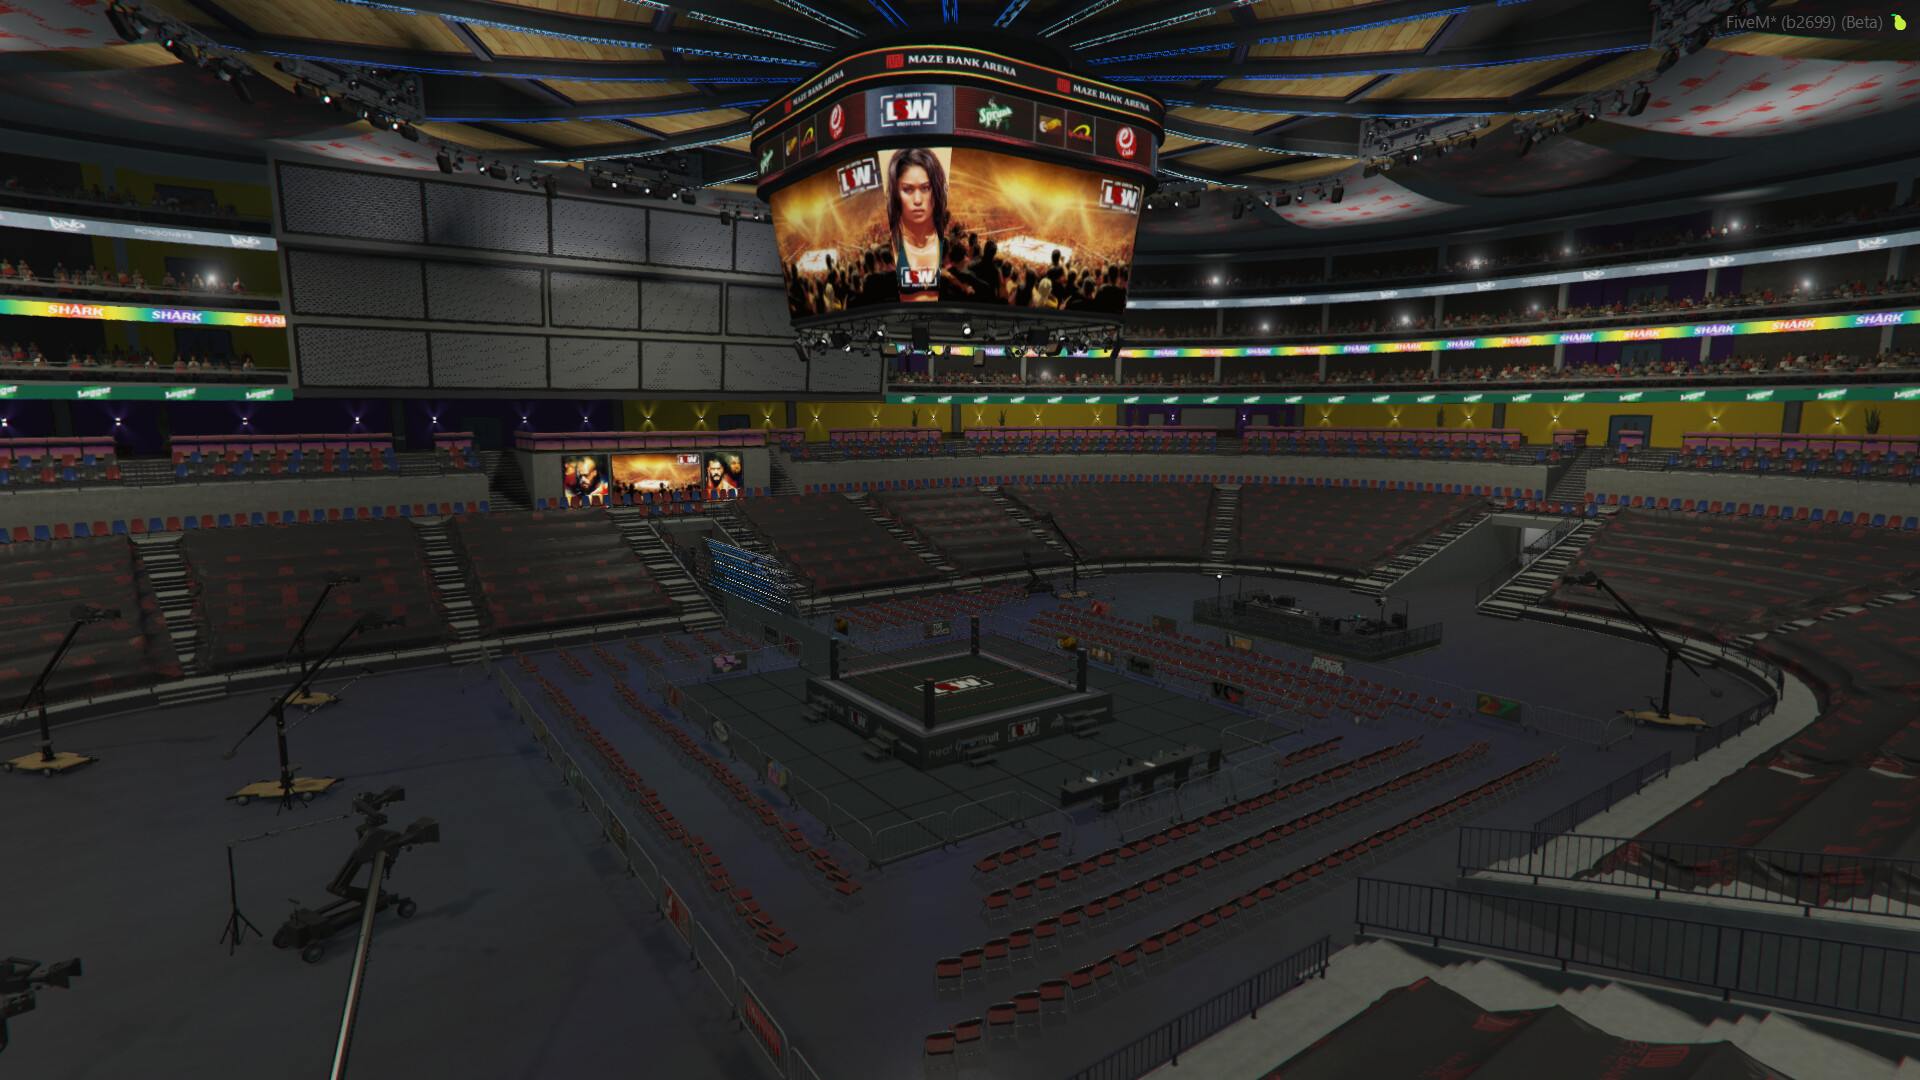 Synced3D - Maze Bank Arena Interior for FiveM Roleplay Servers with ...